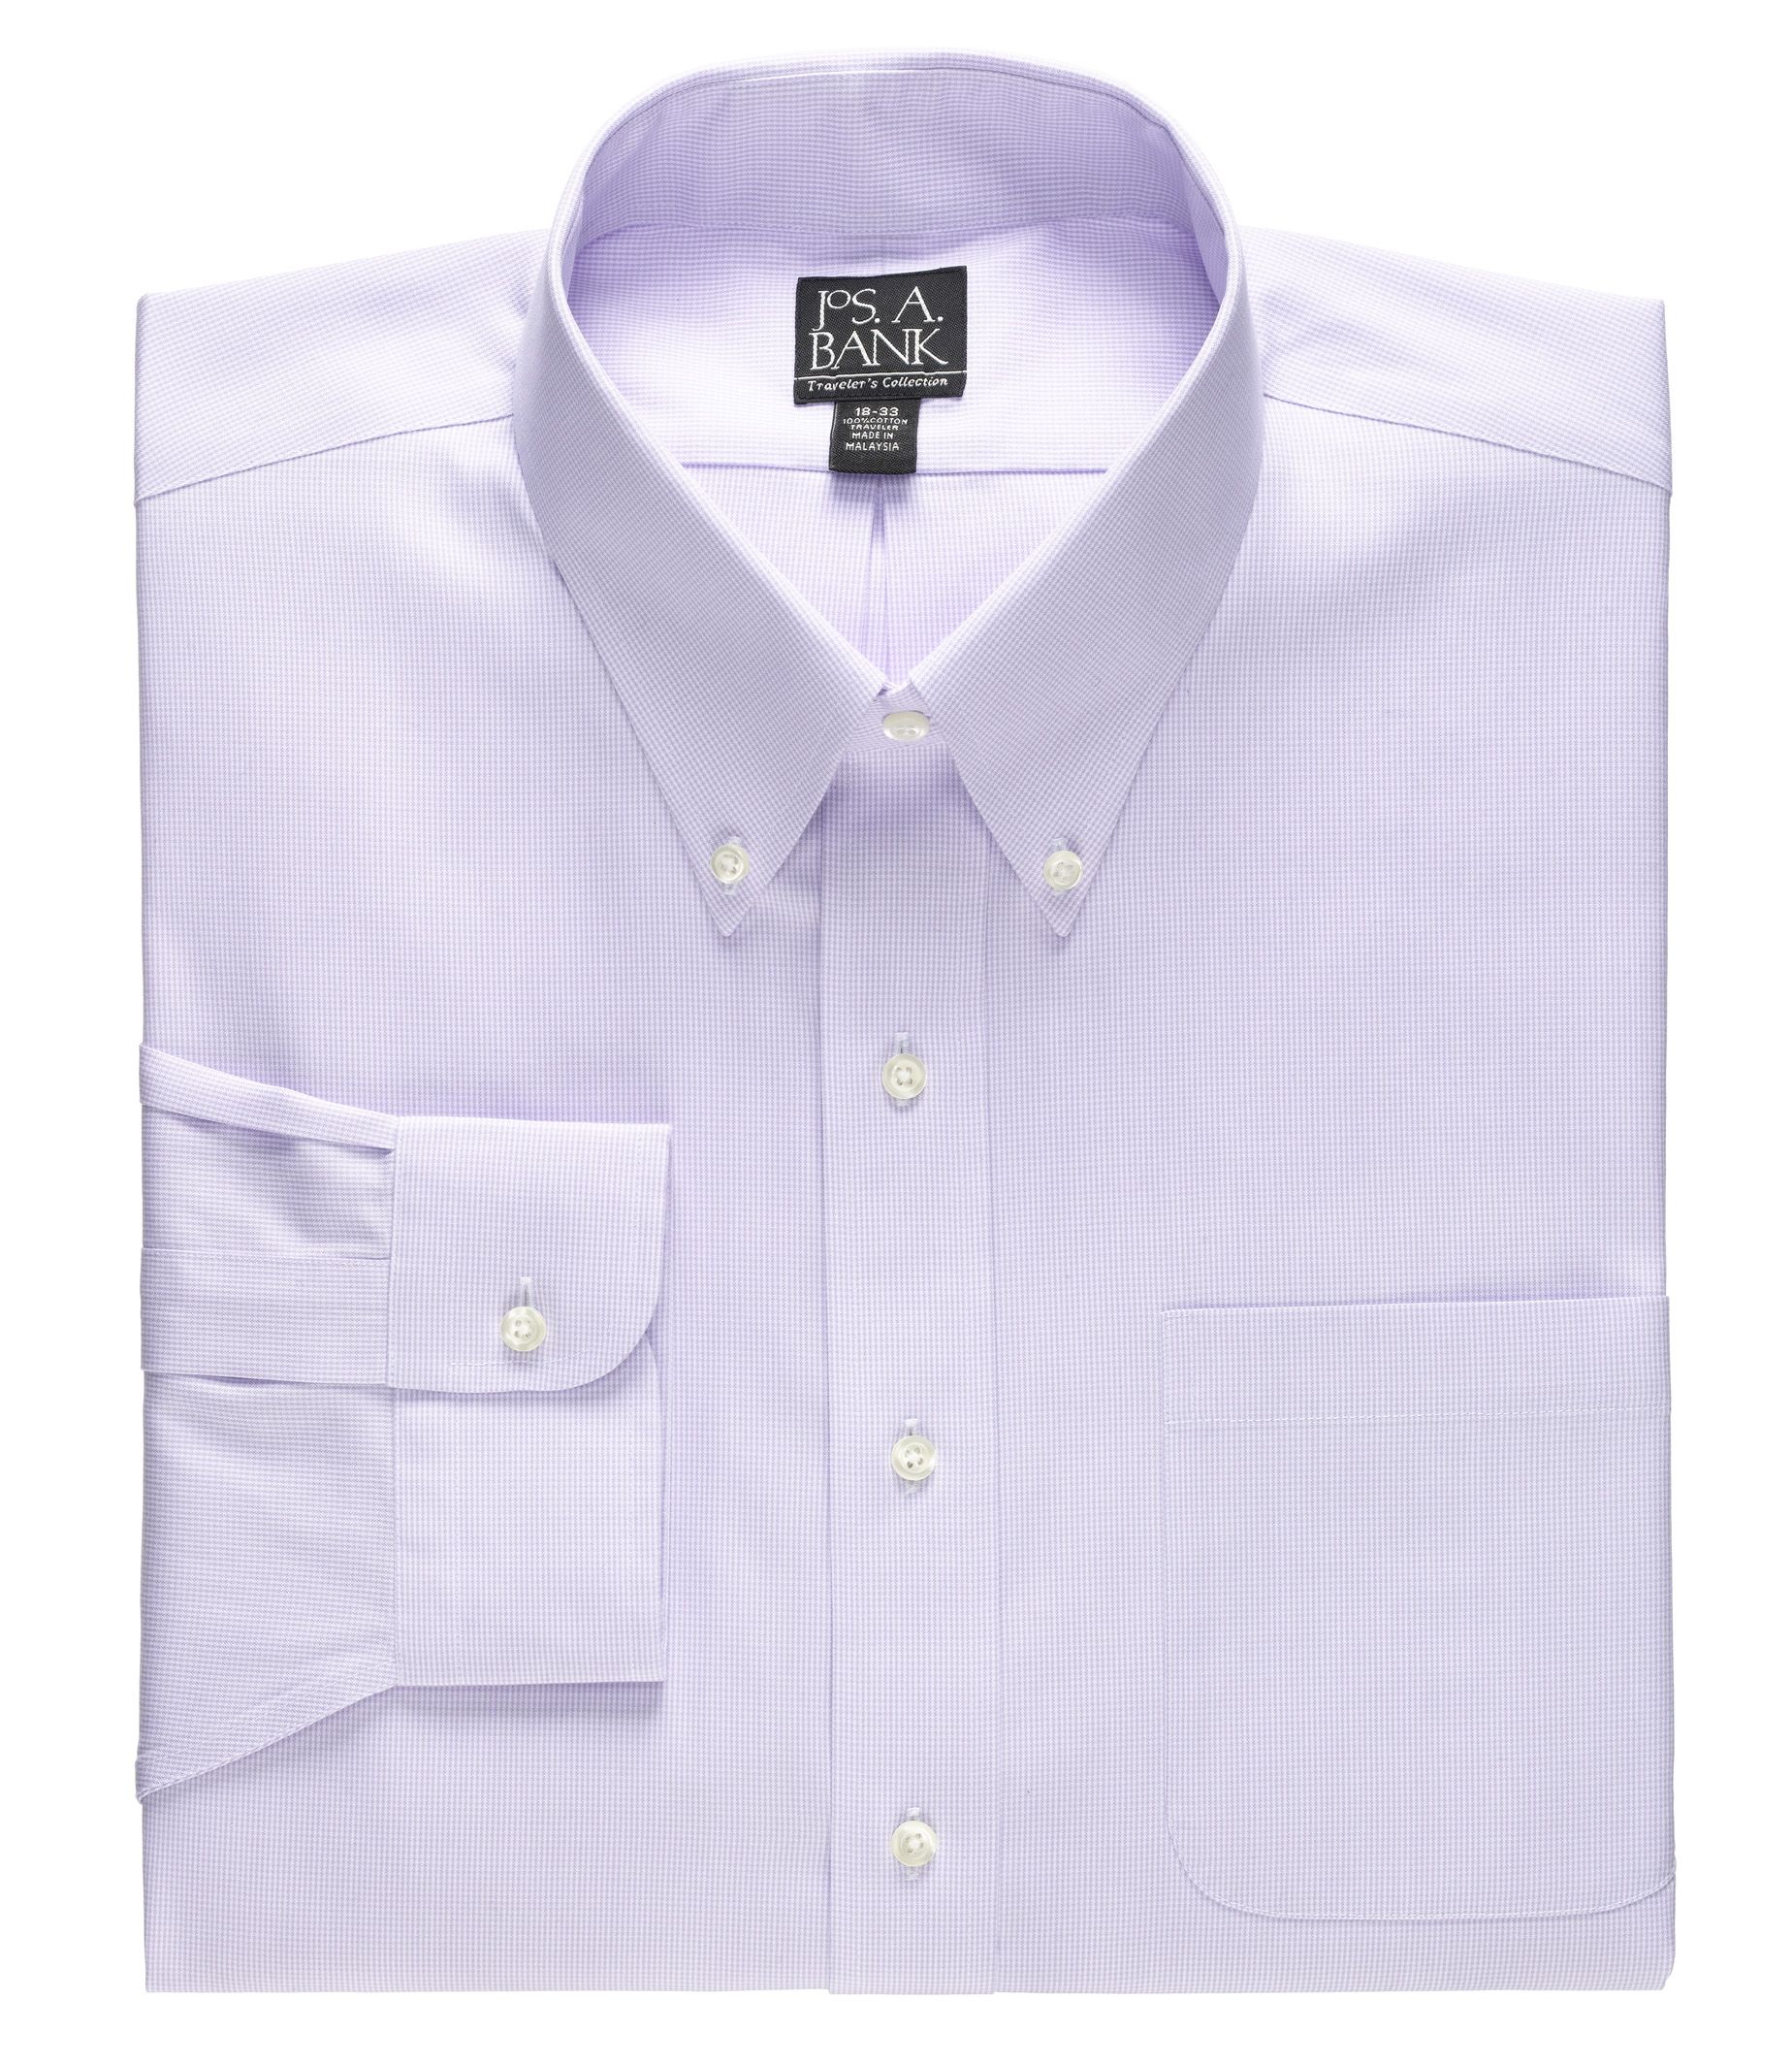 Image of JoS. A. Bank Men's Traveler Collection Tailored Fit Button-Down Collar Mini Check Dress Shirt - Big & Tall, Purple, 17 1/2x33